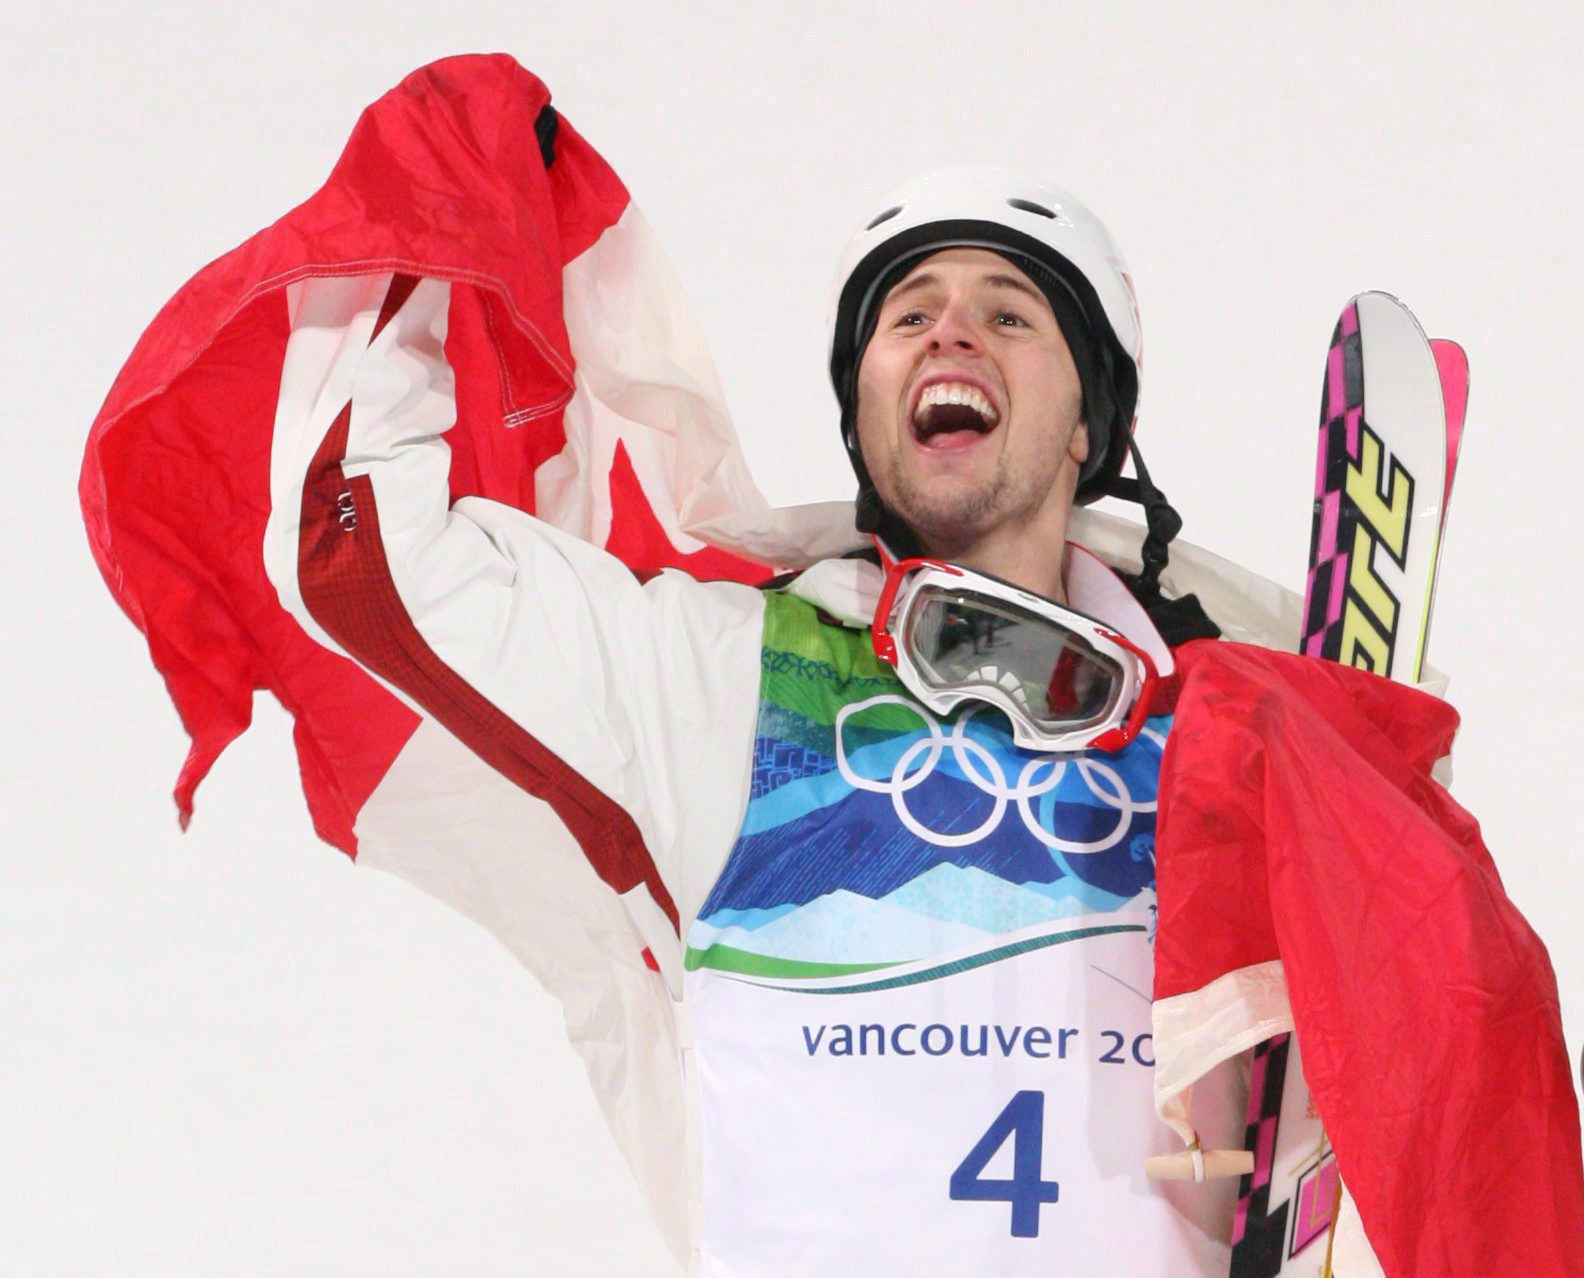 Alex Bilodeau celebrates his gold medal win in men's moguls at Cypress Mountain in Vancouver, B.C., on February 14, 2010. THE CANADIAN PRESS/Sean Kilpatrick